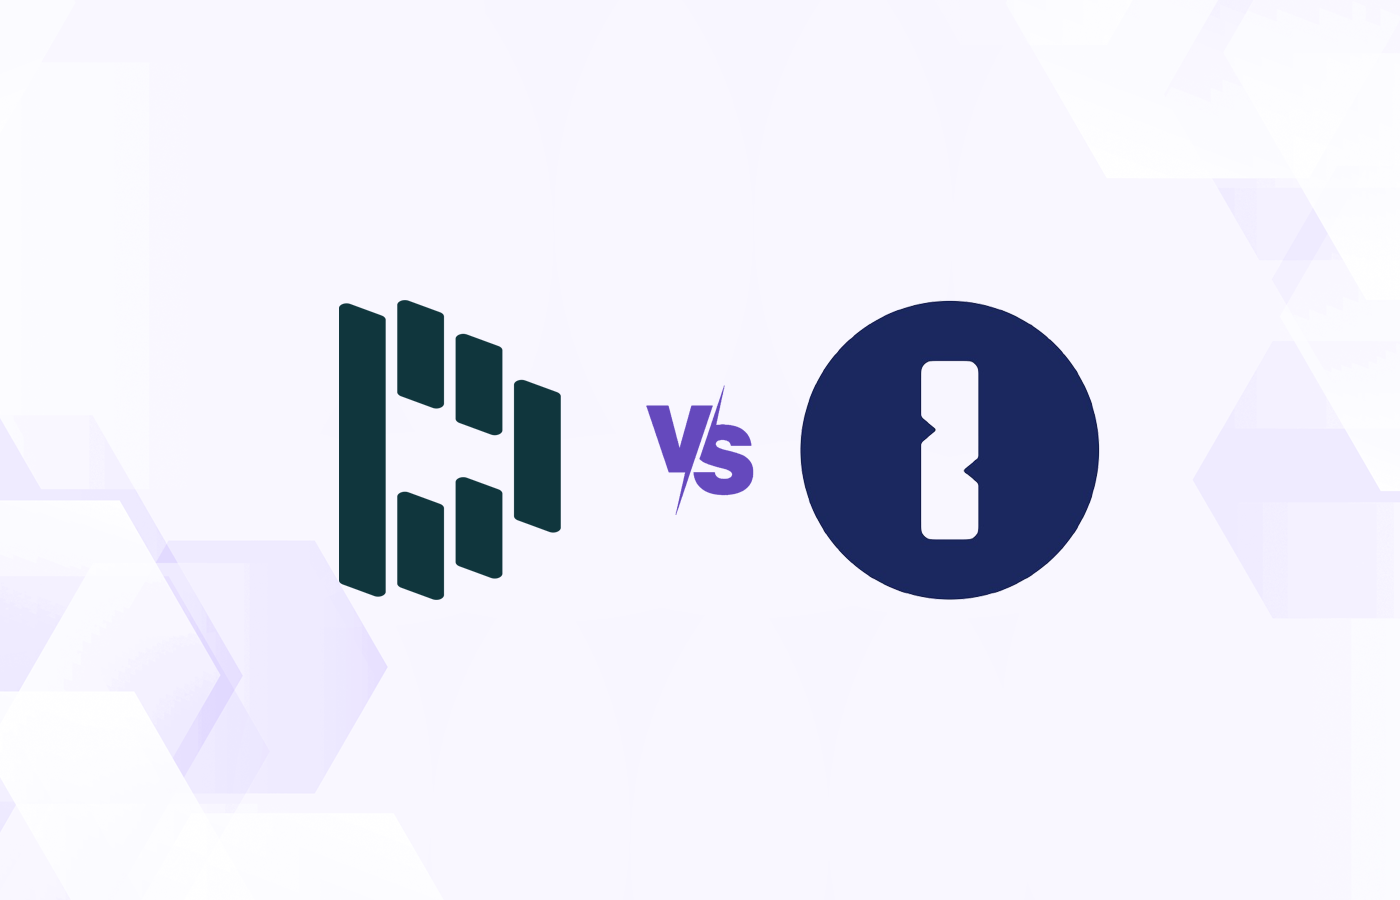 Versus graphic featuring the icons of Dashlane and 1Password.